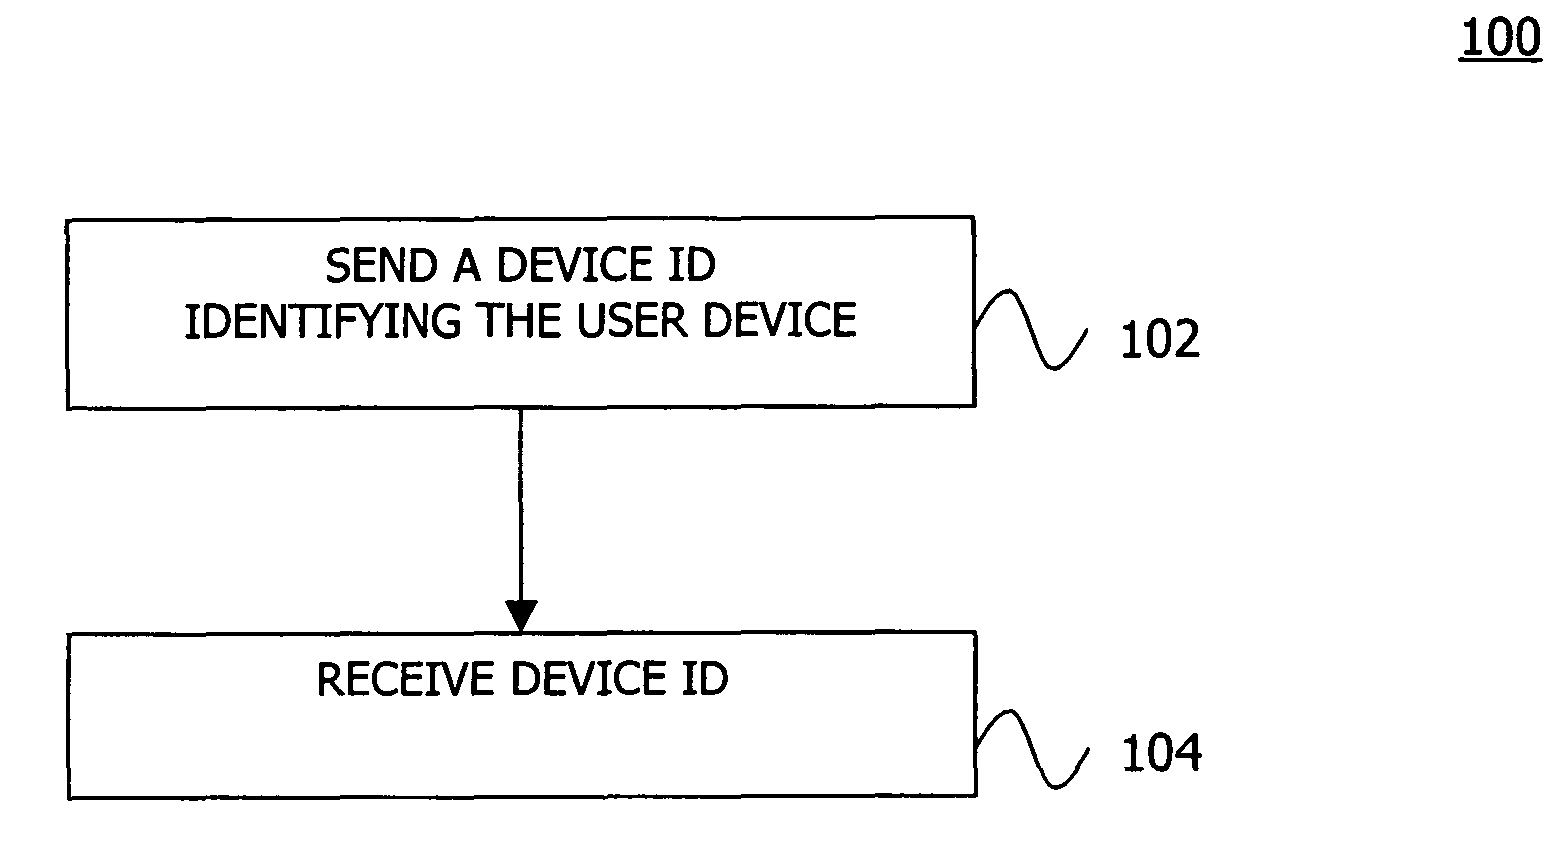 Method for Registering Multi-Contact Devices